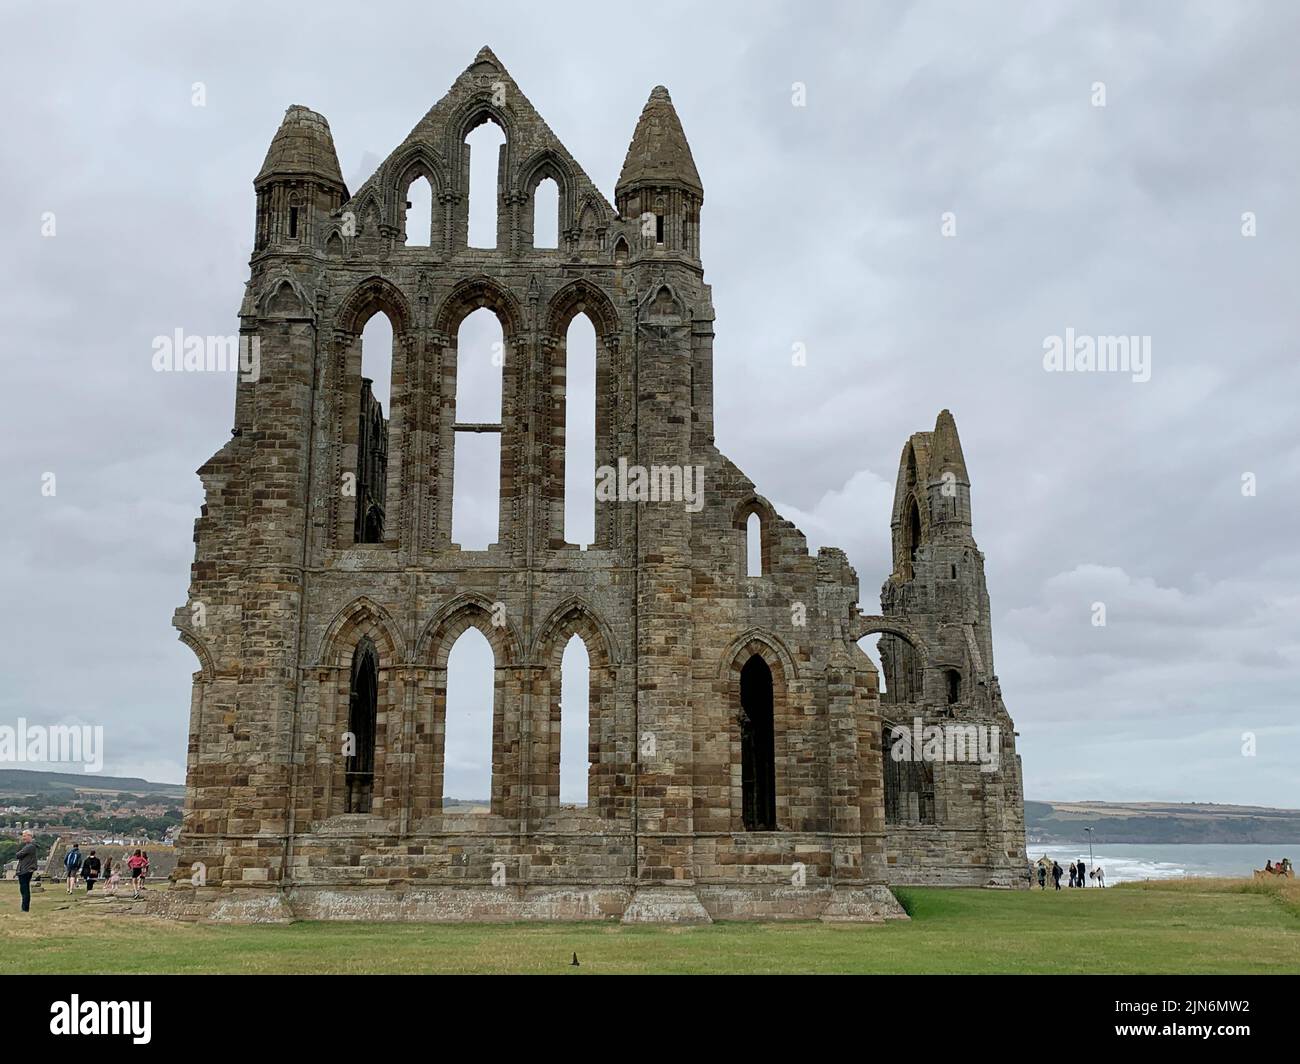 Whitby Abbey FaÃ§ade with People on Overcast Day Stock Photo